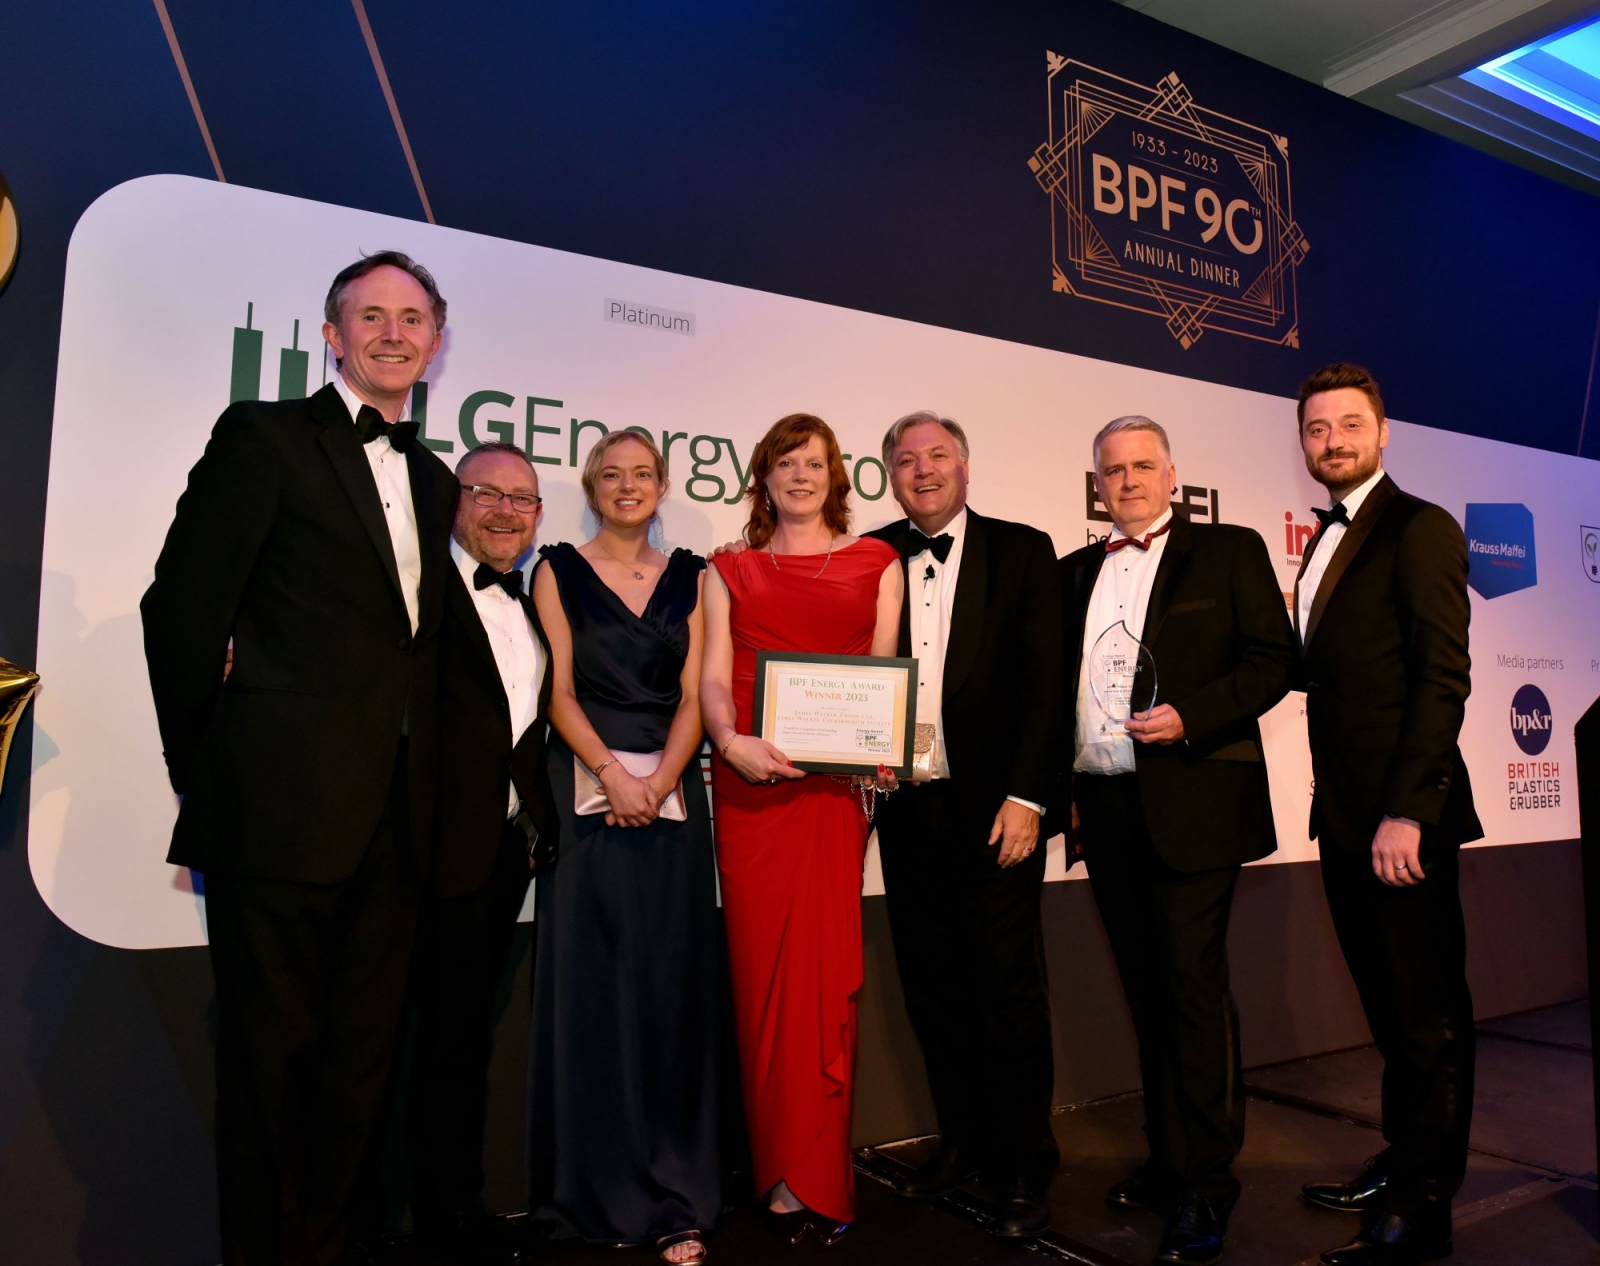 David Jackson and colleagues (l-r) Andrew Slone, Laura Thompson, Emma Bell, Ed Surman and Mark Ashbridge pictured with speaker for the evening, former Shadow Chancellor, Ed Balls as they receive the 2023 BPF Energy Award on behalf of James Walker Group.